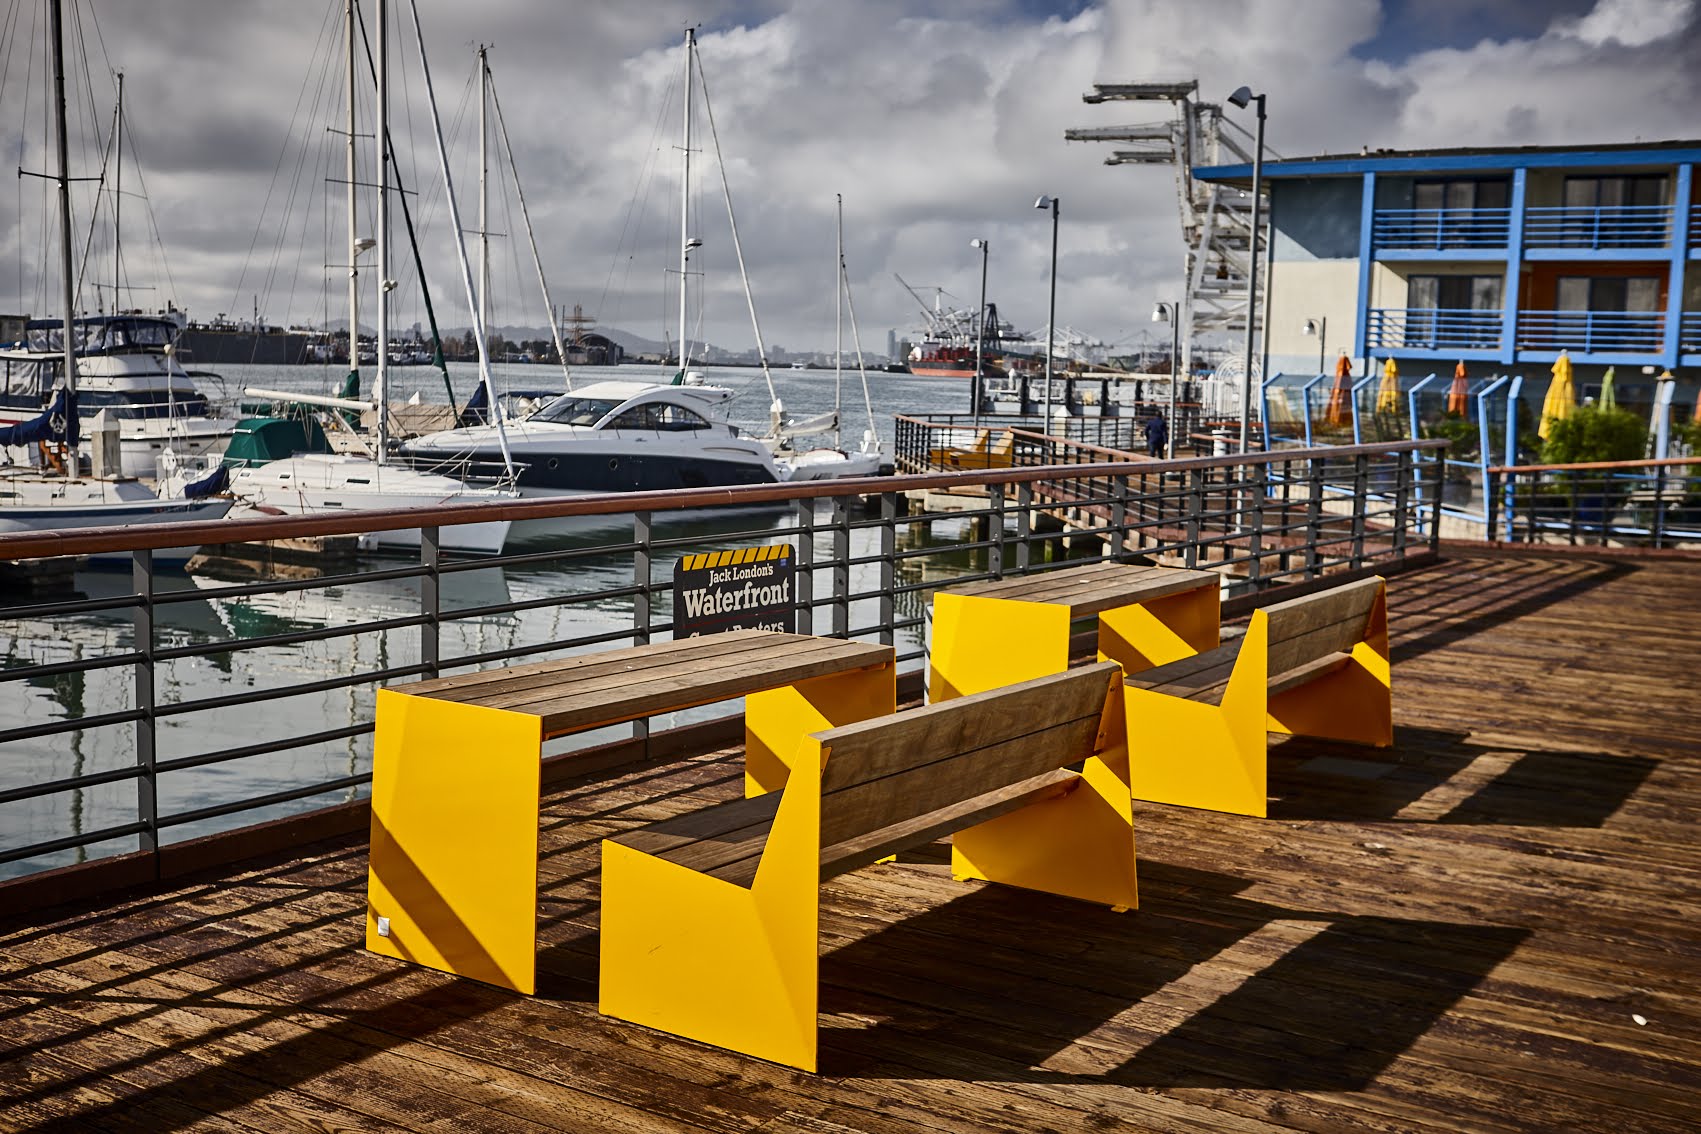 The sun-benches and chairs in this waterfront recreation area are fabricated with Kebony modified wood Clear decking located at Jack London Square